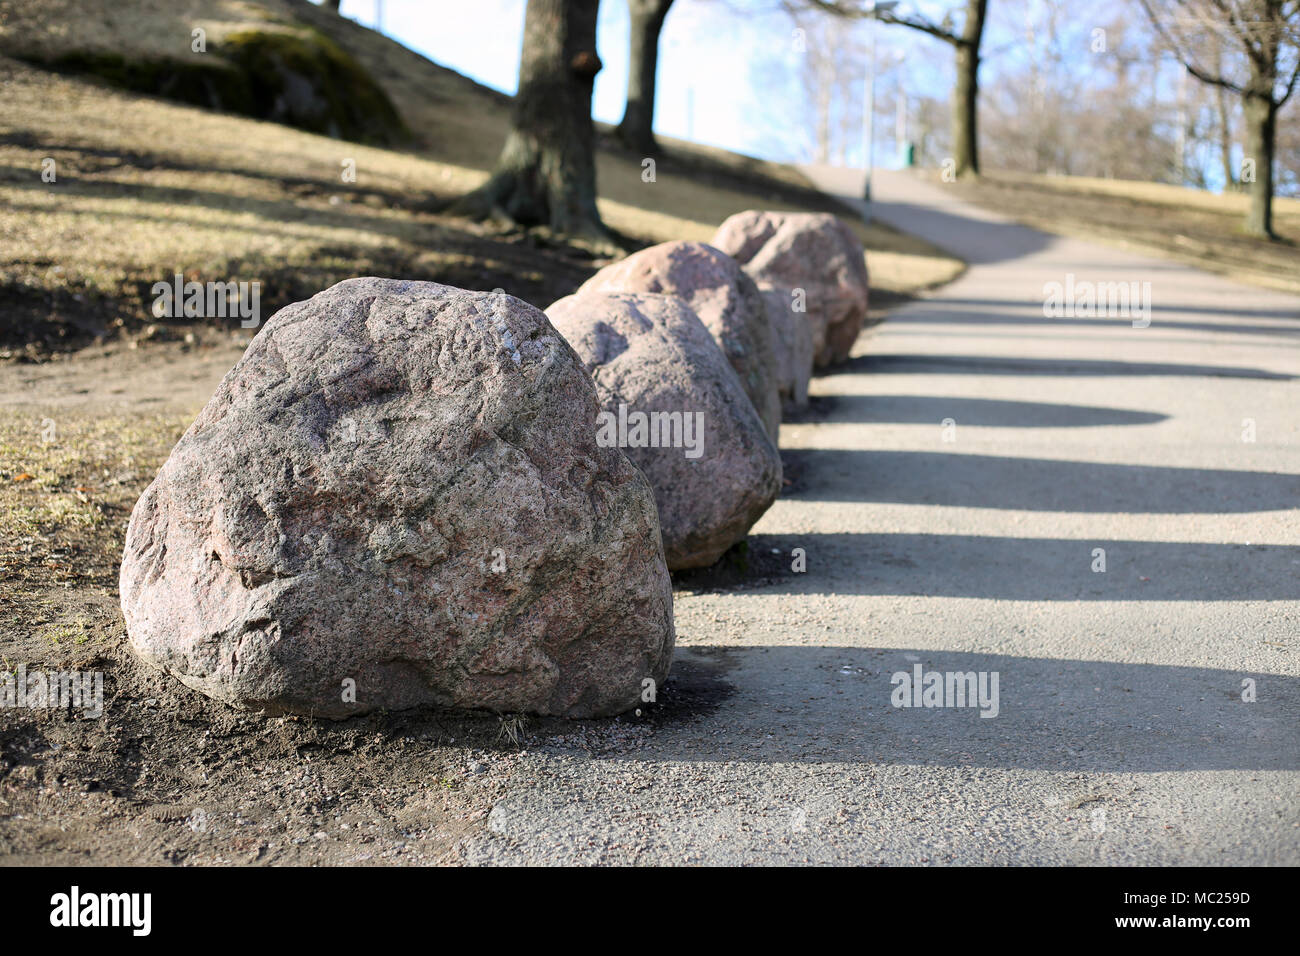 A walkway during spring after the snow has melted. Pale yet beautiful nature including some trees, grass and rocks. Beautiful sun light. Stock Photo